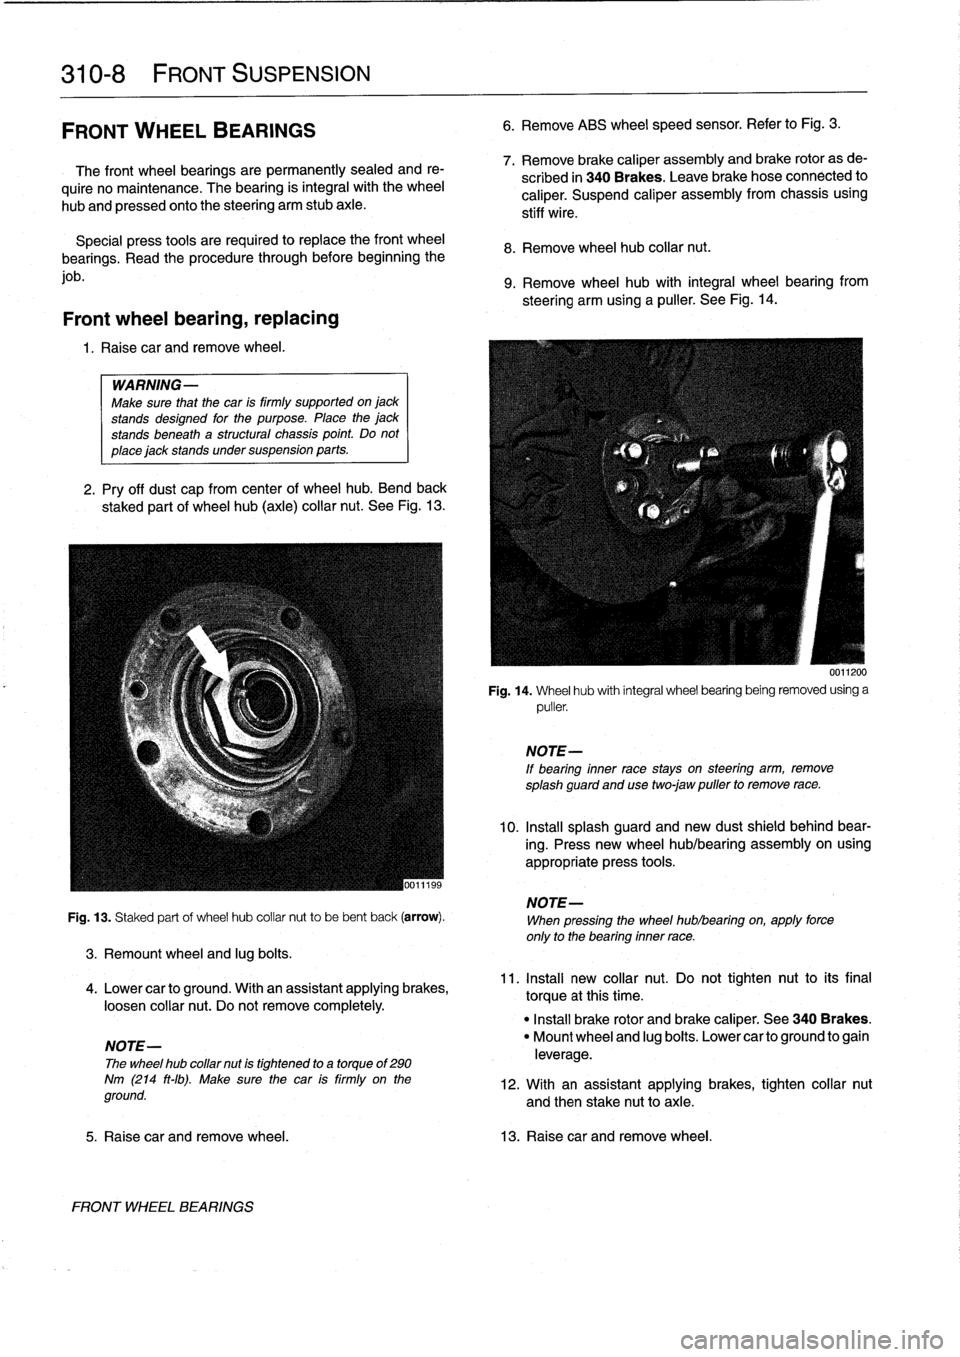 BMW 323i 1998 E36 Owners Guide 
310-
8

	

FRONT
SUSPENSION

FRONT
WHEEL
BEARINGS

The
front
wheel
bearings
are
permanently
sealed
and
re-

quire
no
maintenance
.
The
bearing
is
integral
with
the
wheel

hub
and
pressed
onto
the
ste